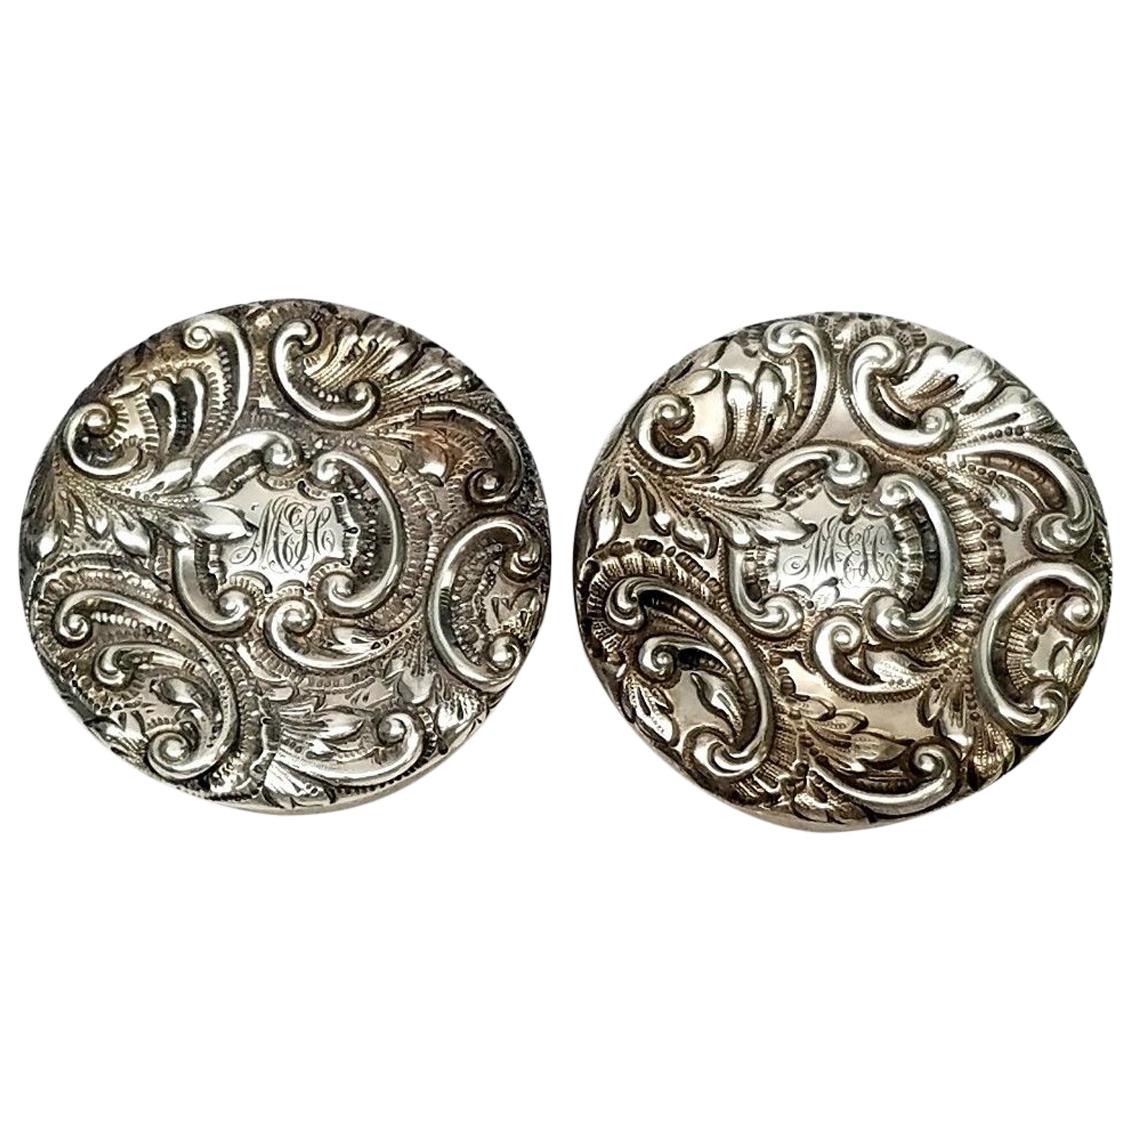 Set of 2 Theodore B Starr Sterling Silver Round Repoussé Pill Boxes Monogram MEH